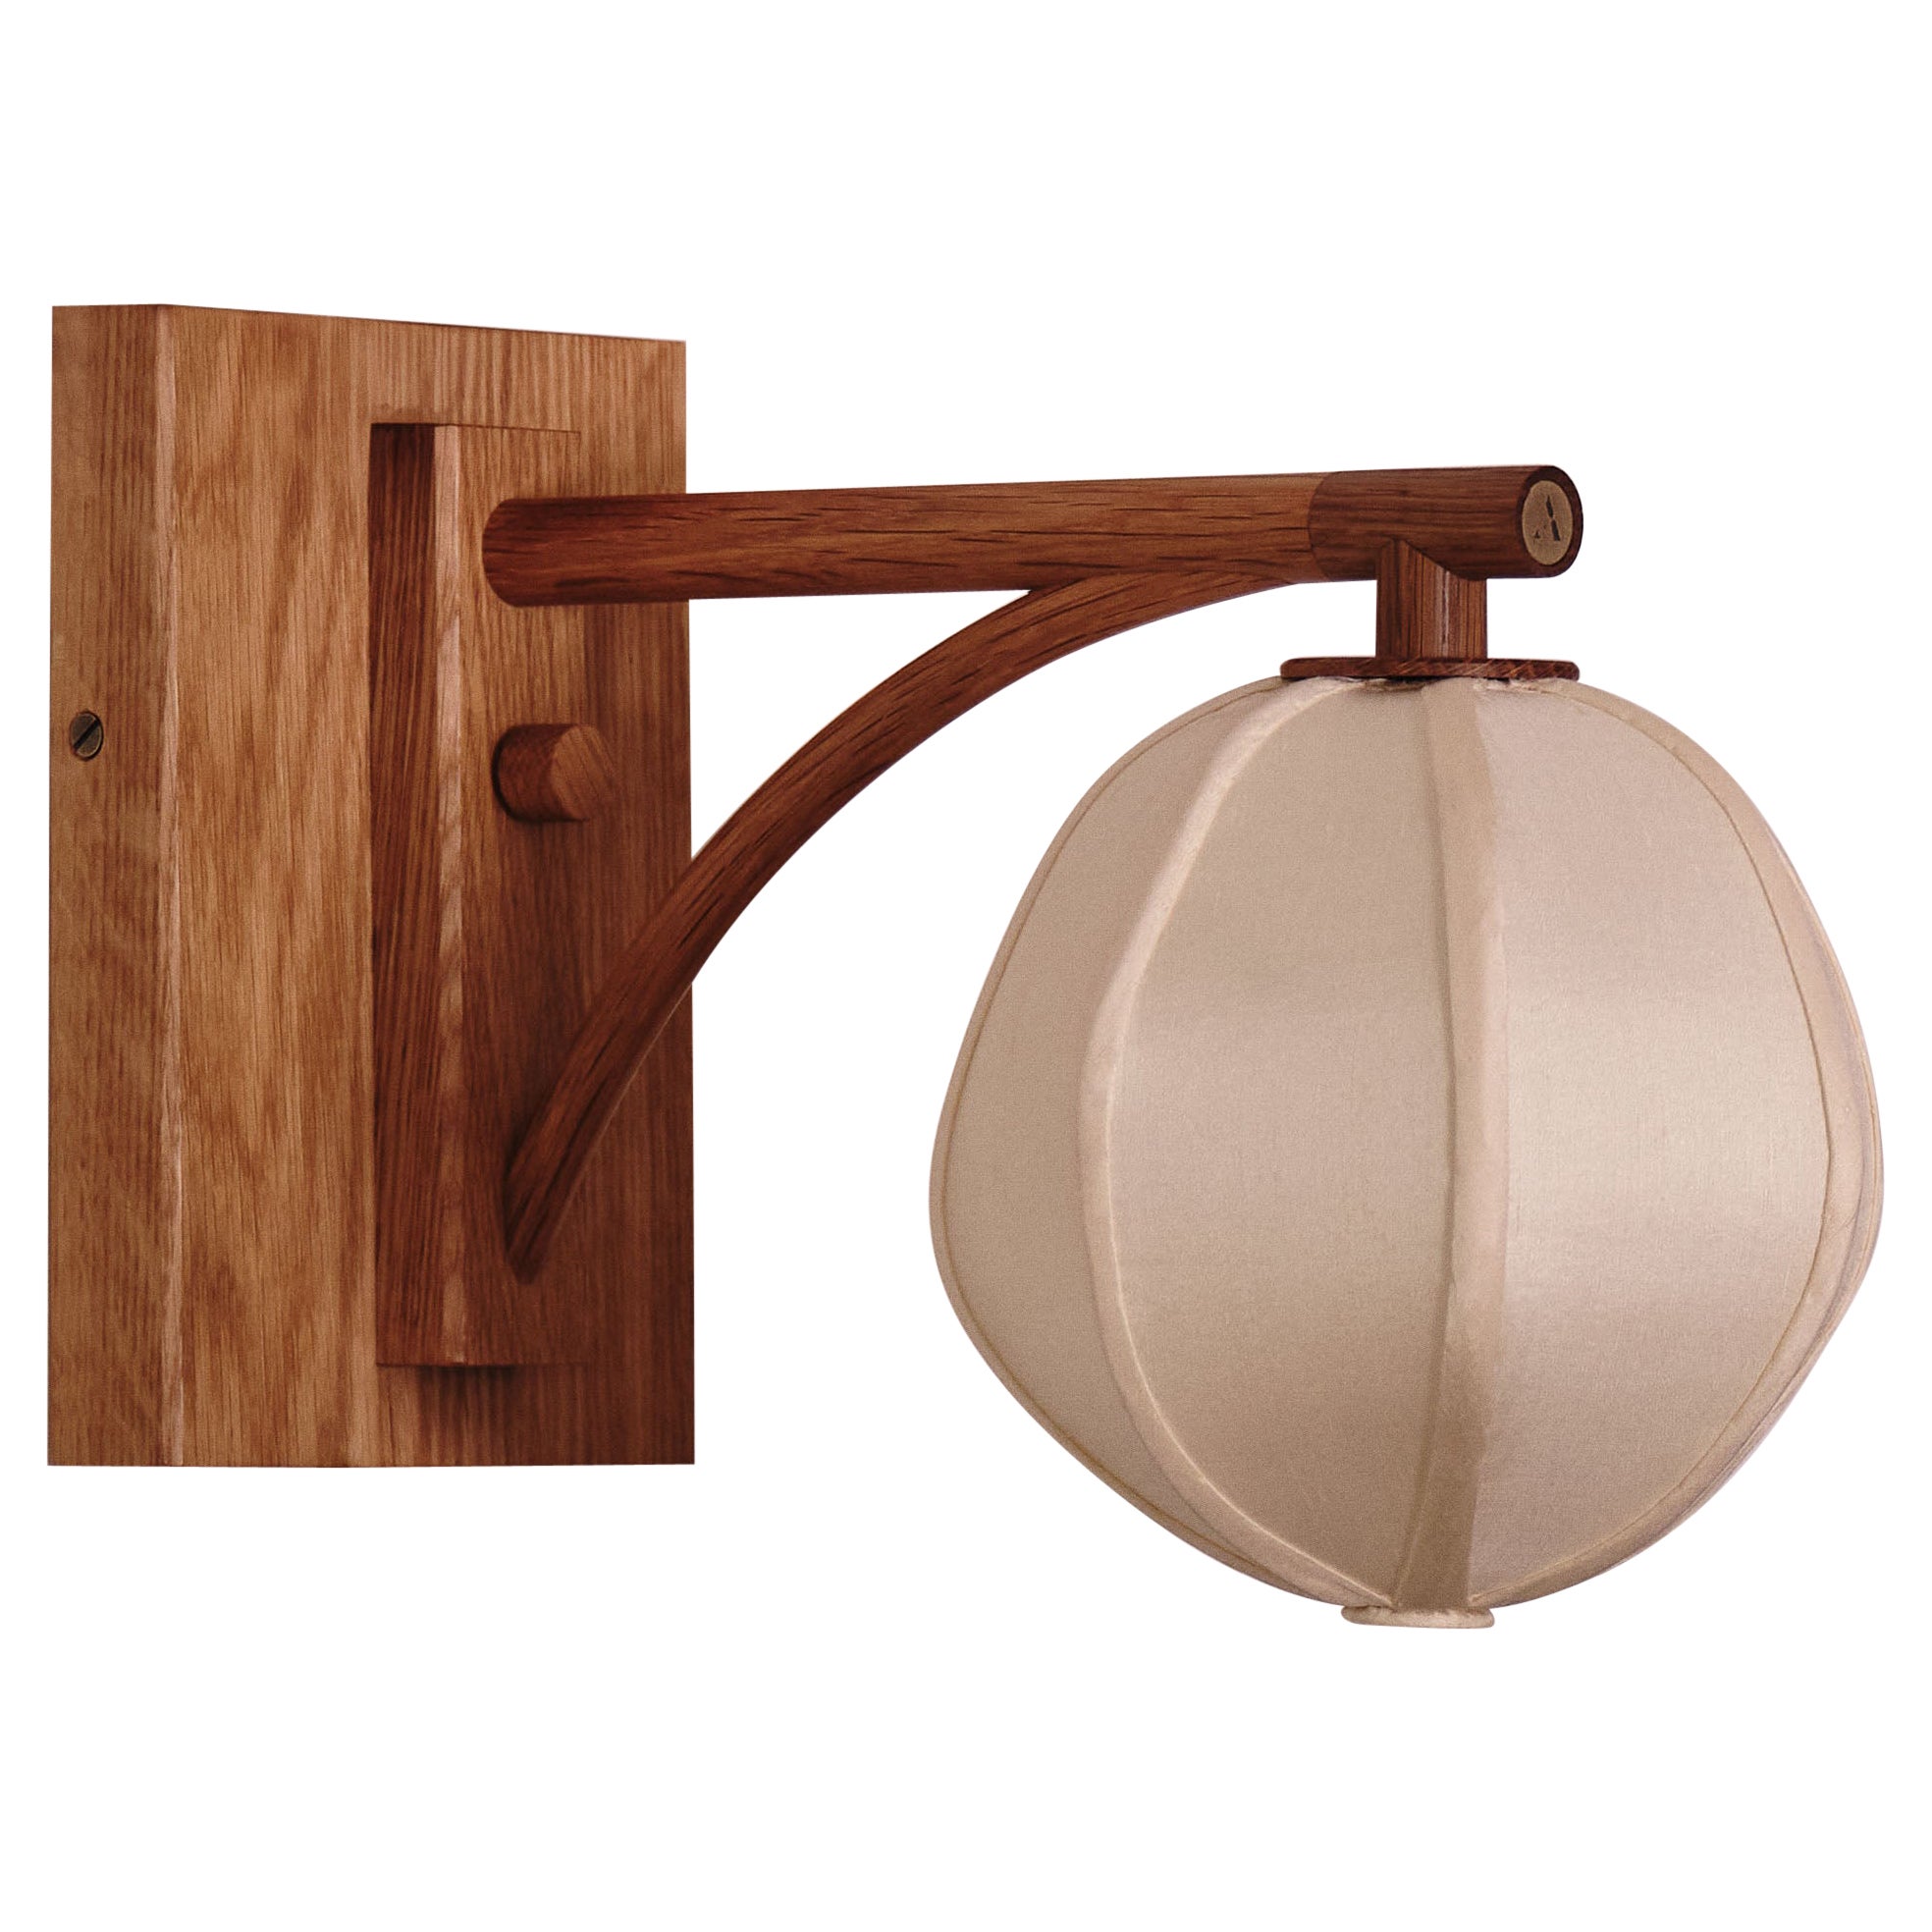 Anna Karlin Mulberry Globe Sconce - Small